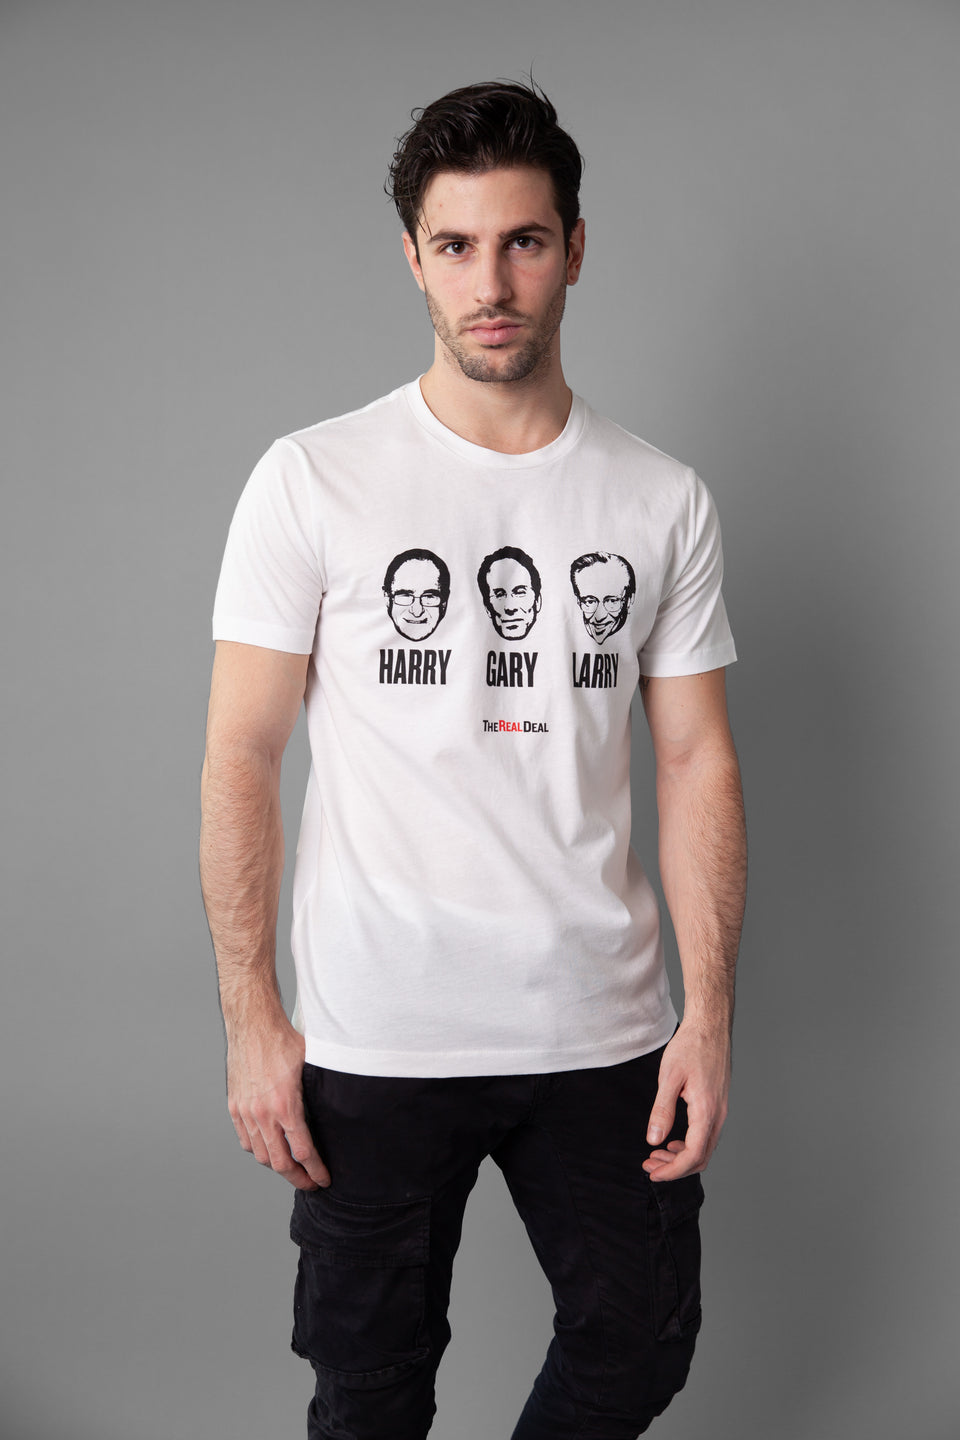 Harry, Gary and Larry T-Shirt